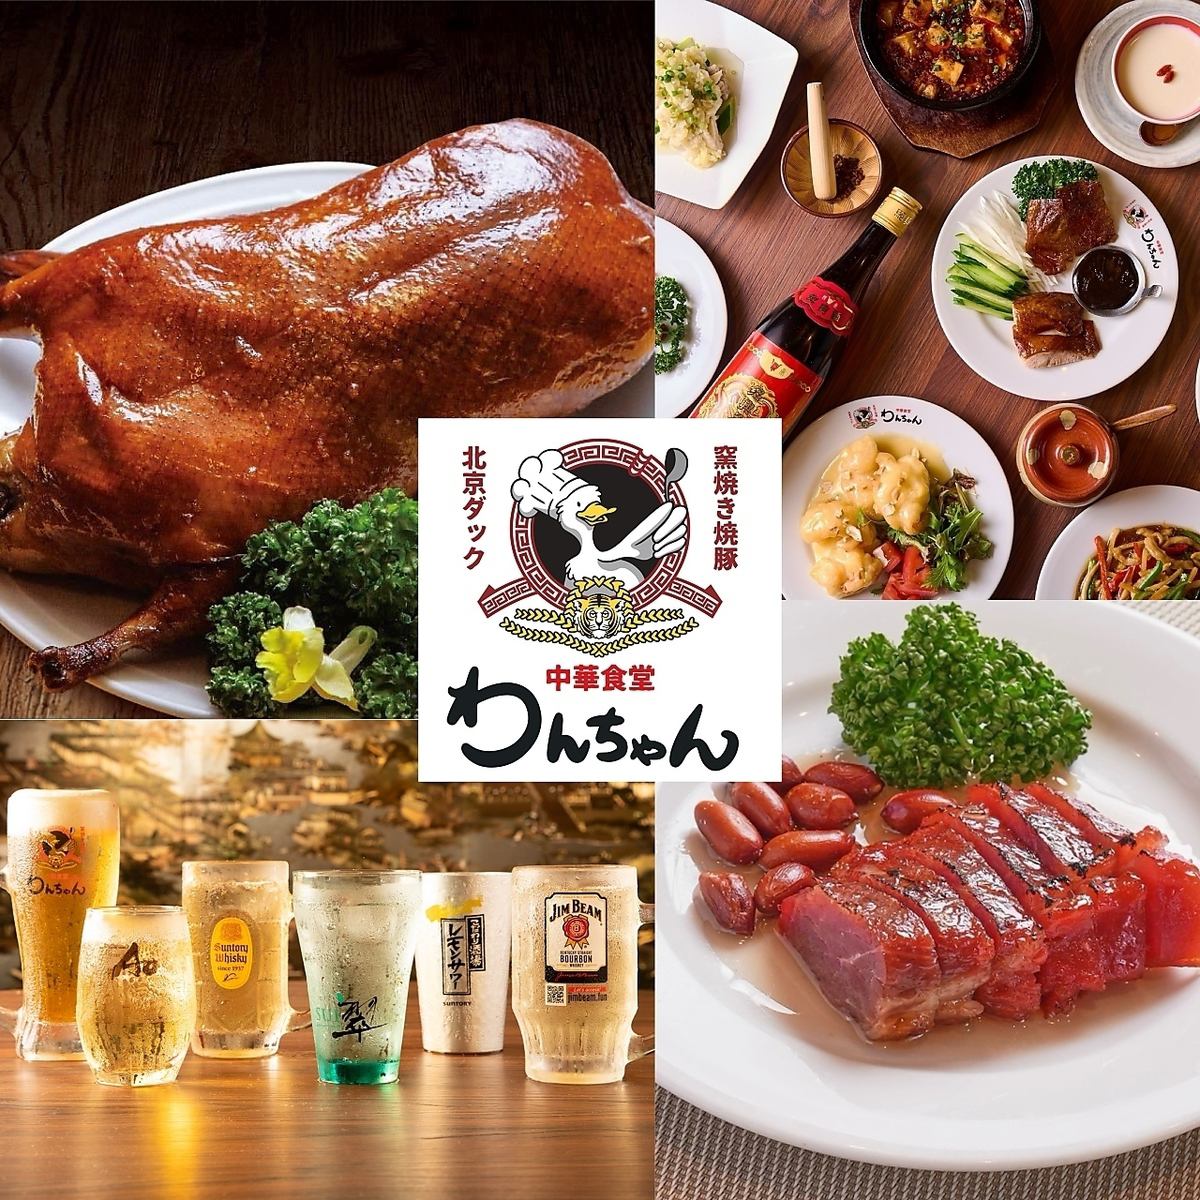 Banquet course starts from 3,800 yen! Authentic Chinese cuisine prepared by a veteran chef/Kiln-grilled pork belly/Peking duck